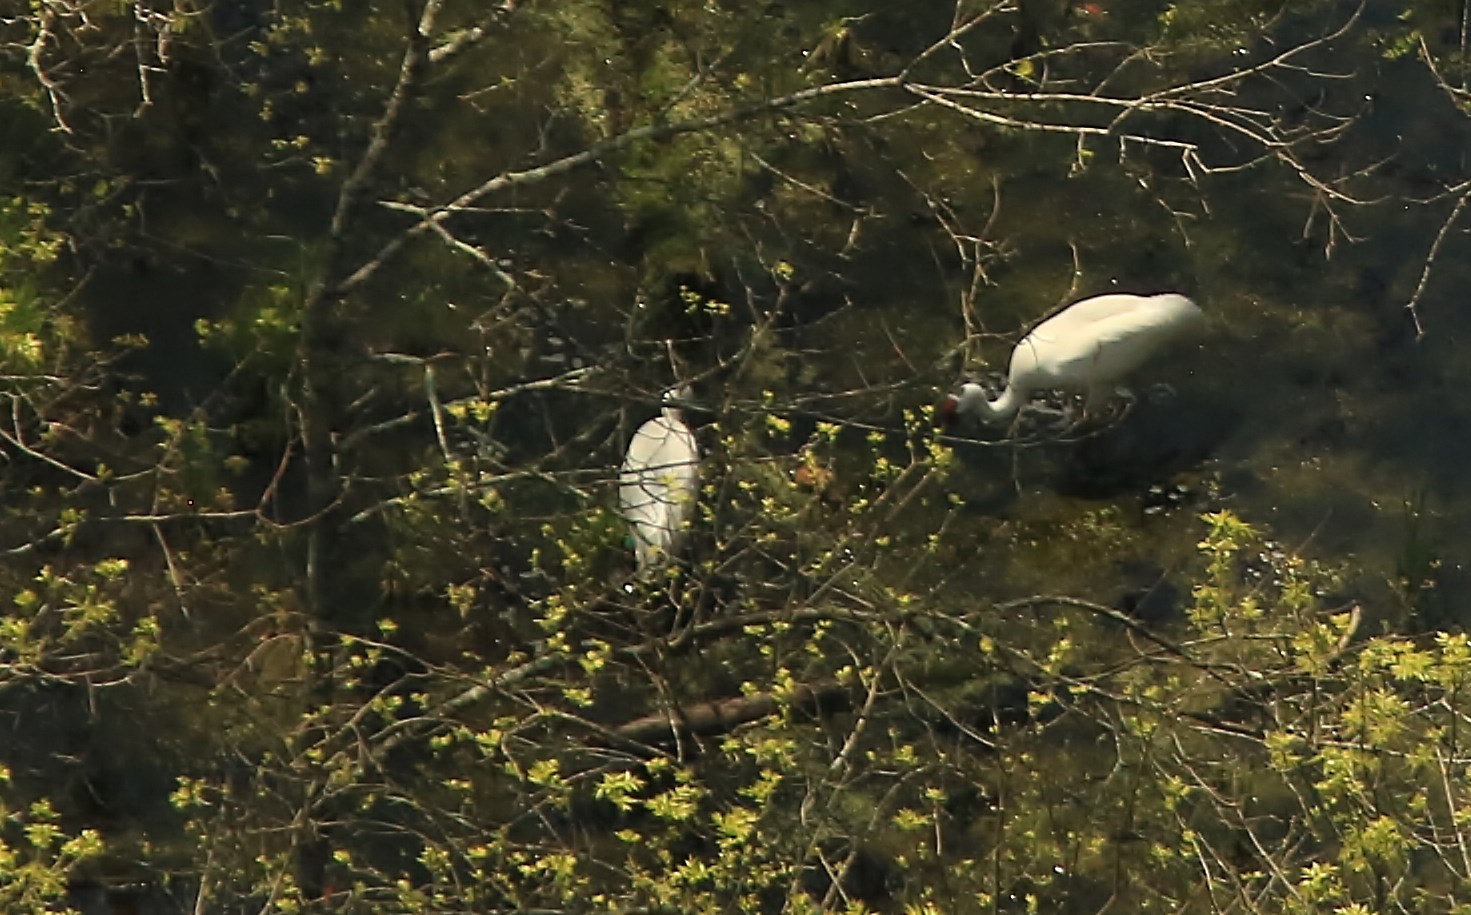 Aerial view of two adult Whooping Cranes and their young chick. The birds are hidden by vegetation.